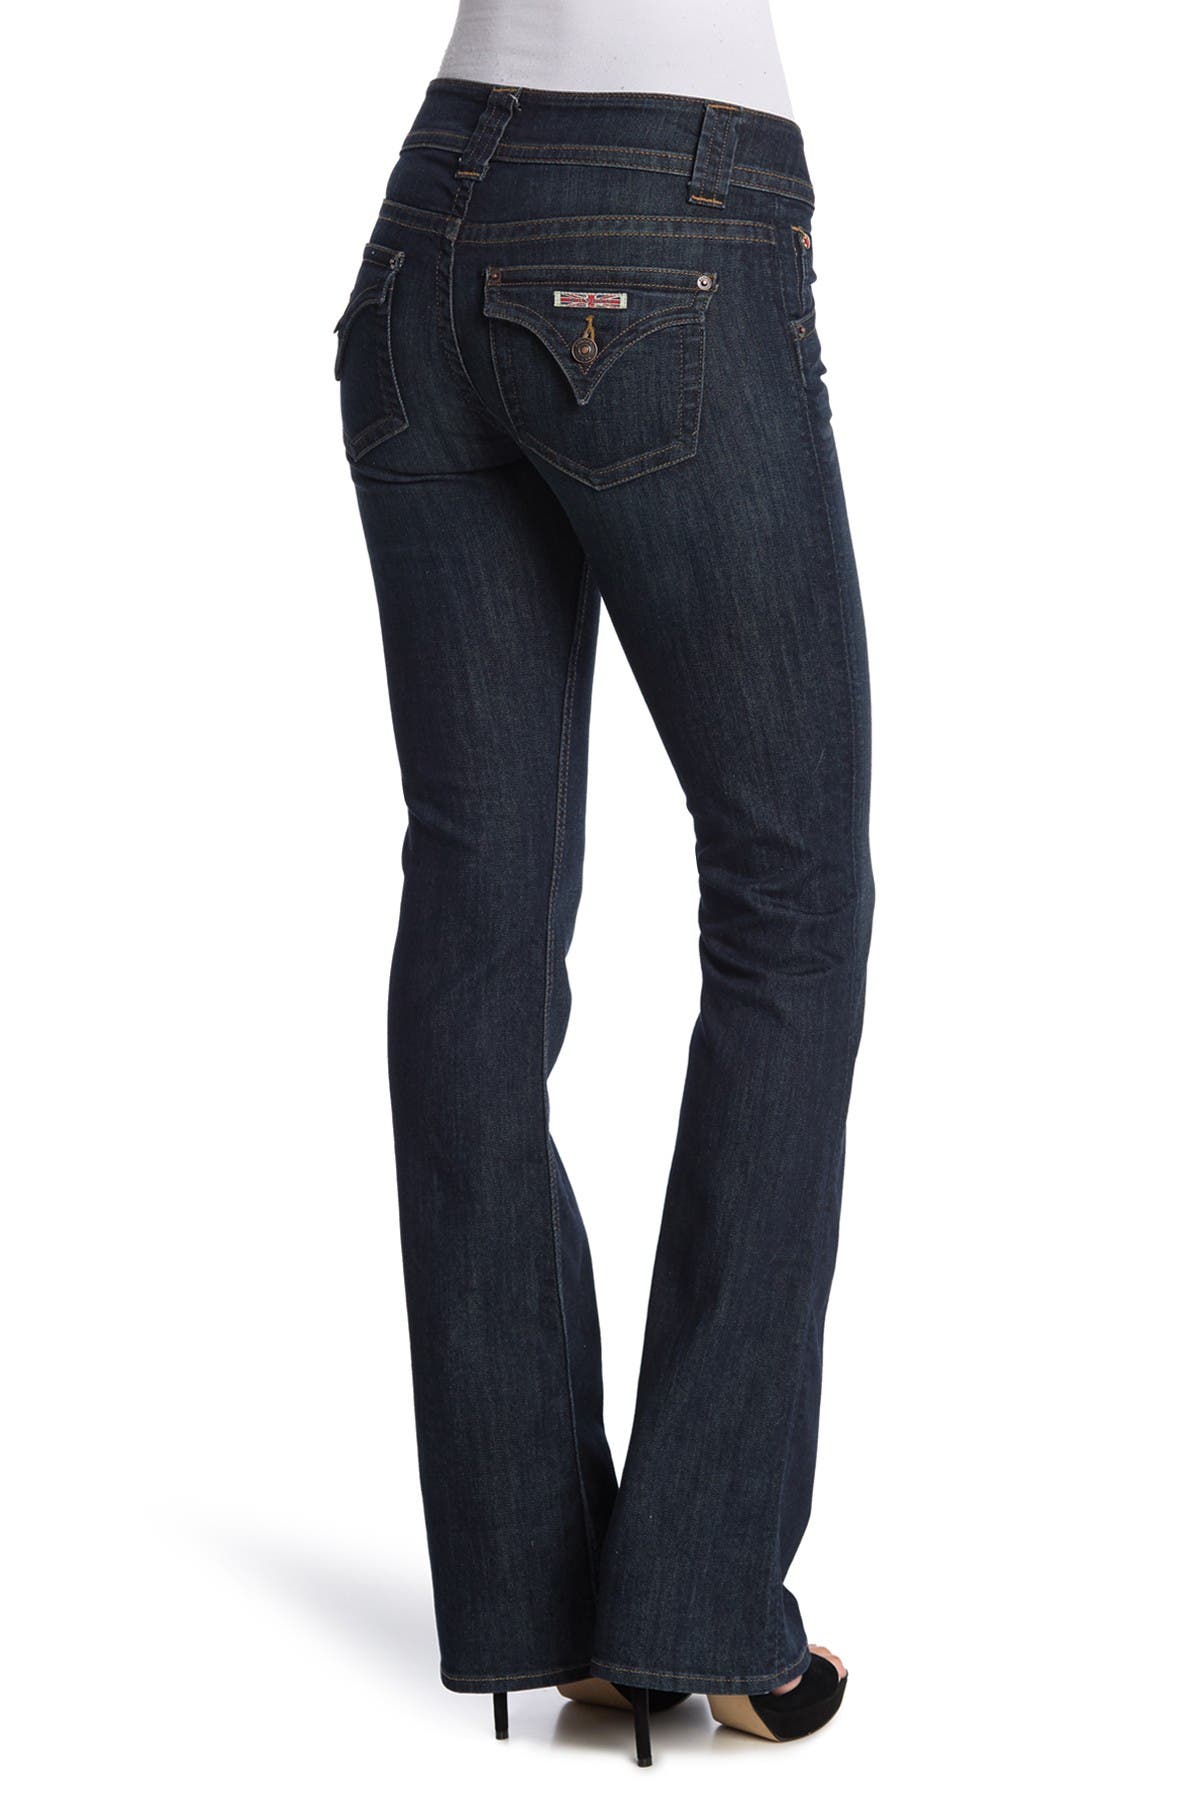 HUDSON Jeans | Signature Bootcut Mid Rise Jeans | Nordstrom Rack